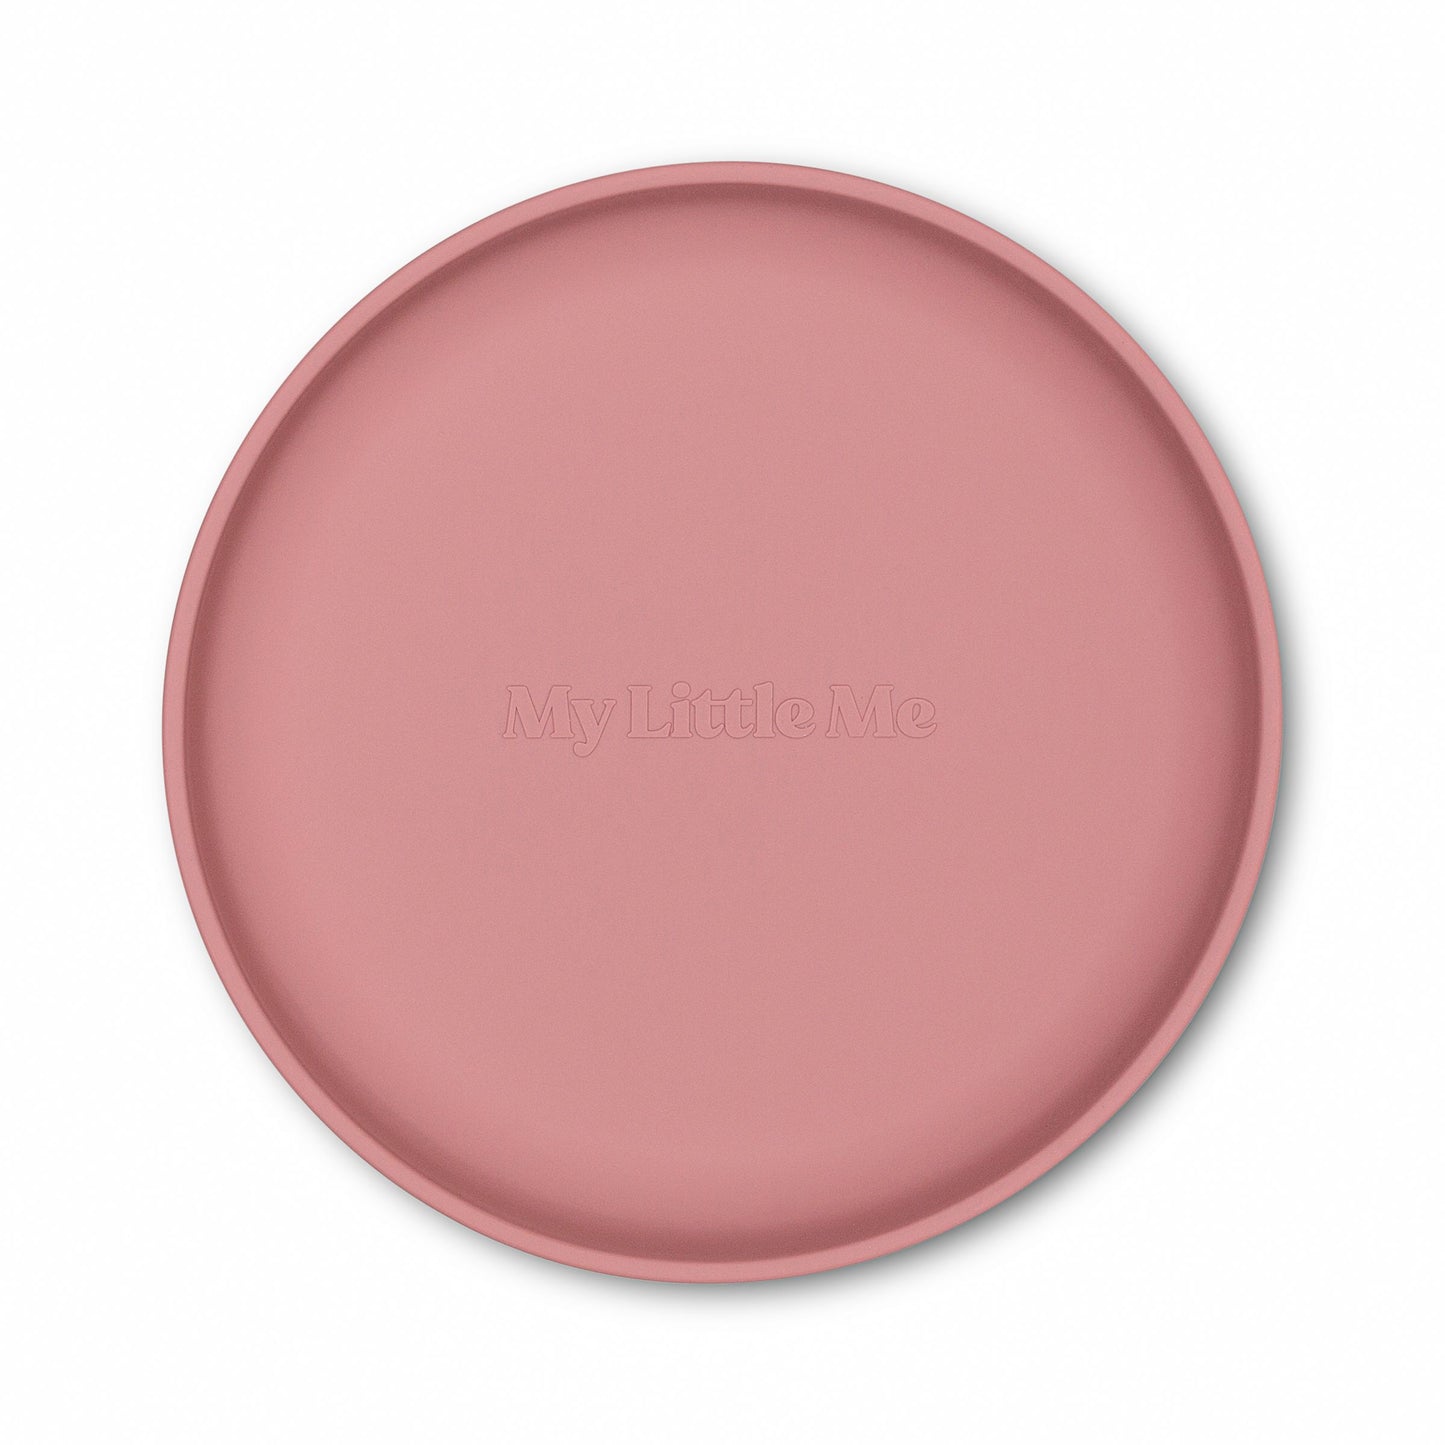 Silicone Dinner Plate